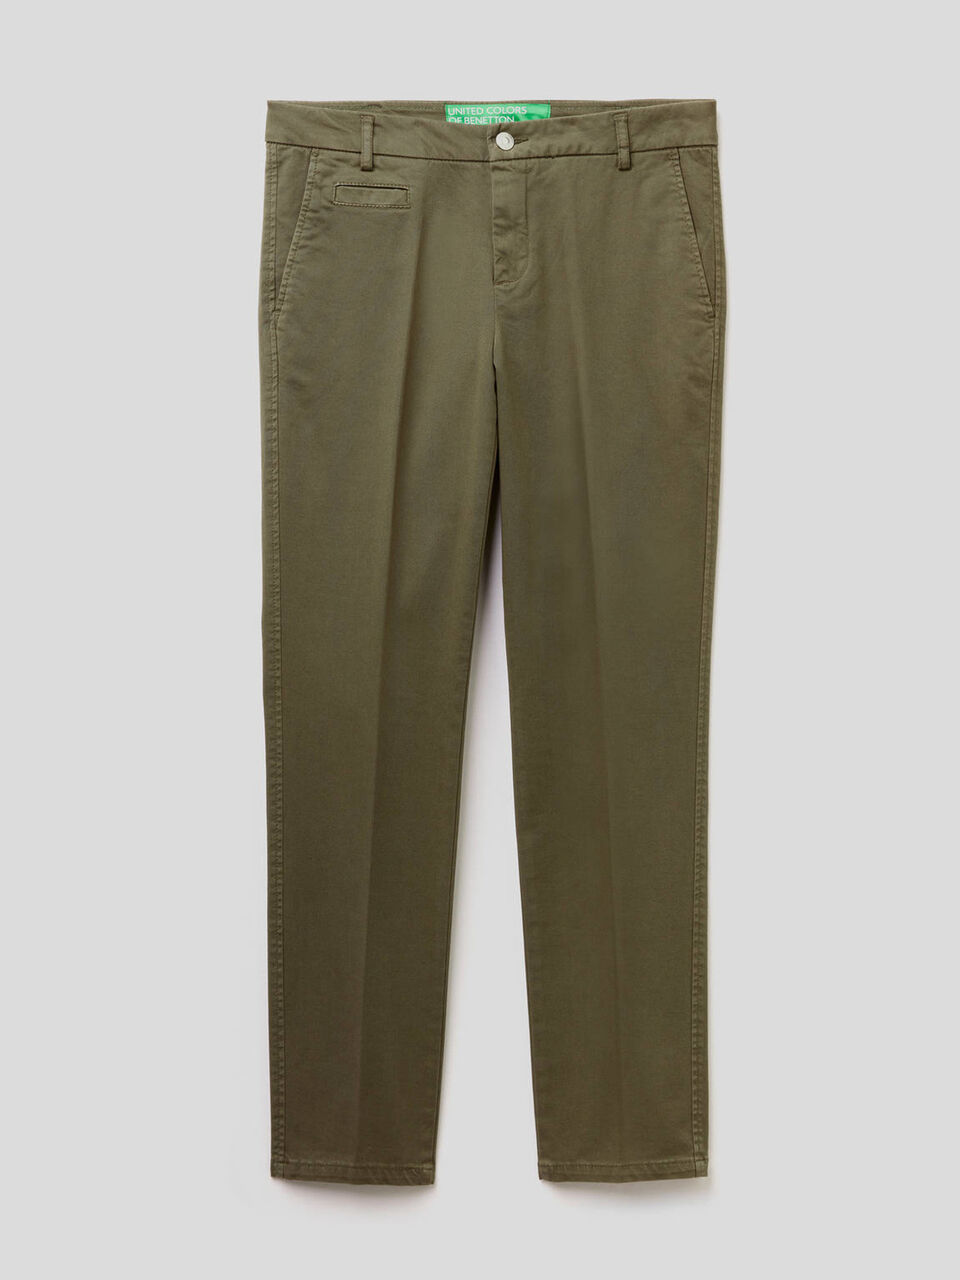 Army green slim fit cotton chinos